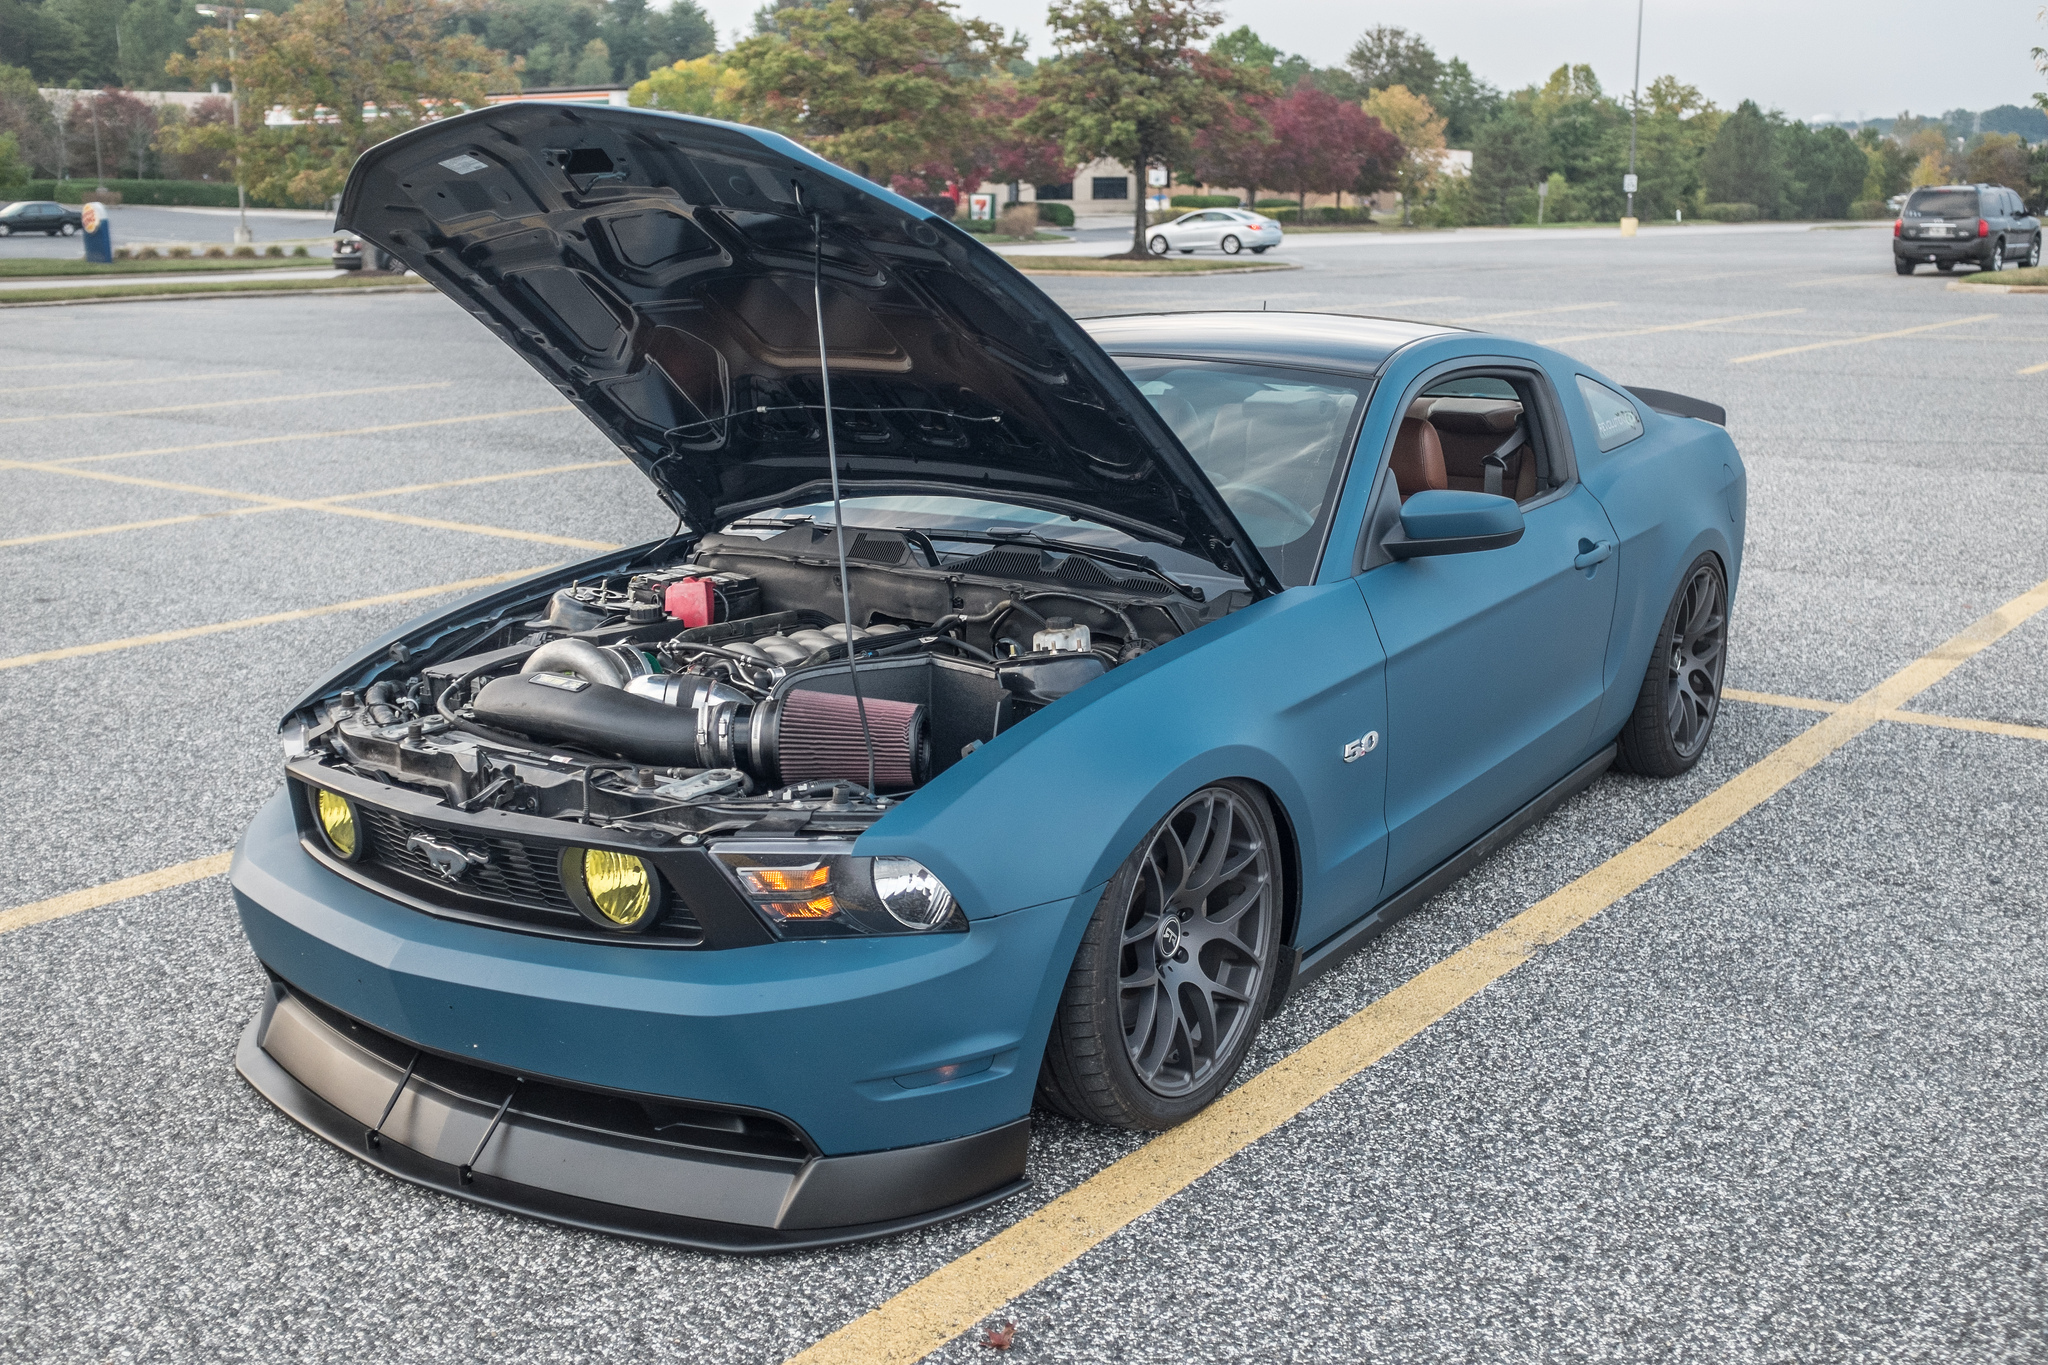 engines, Shelby, Shelby GT, Muscle Cars, Car Wallpaper